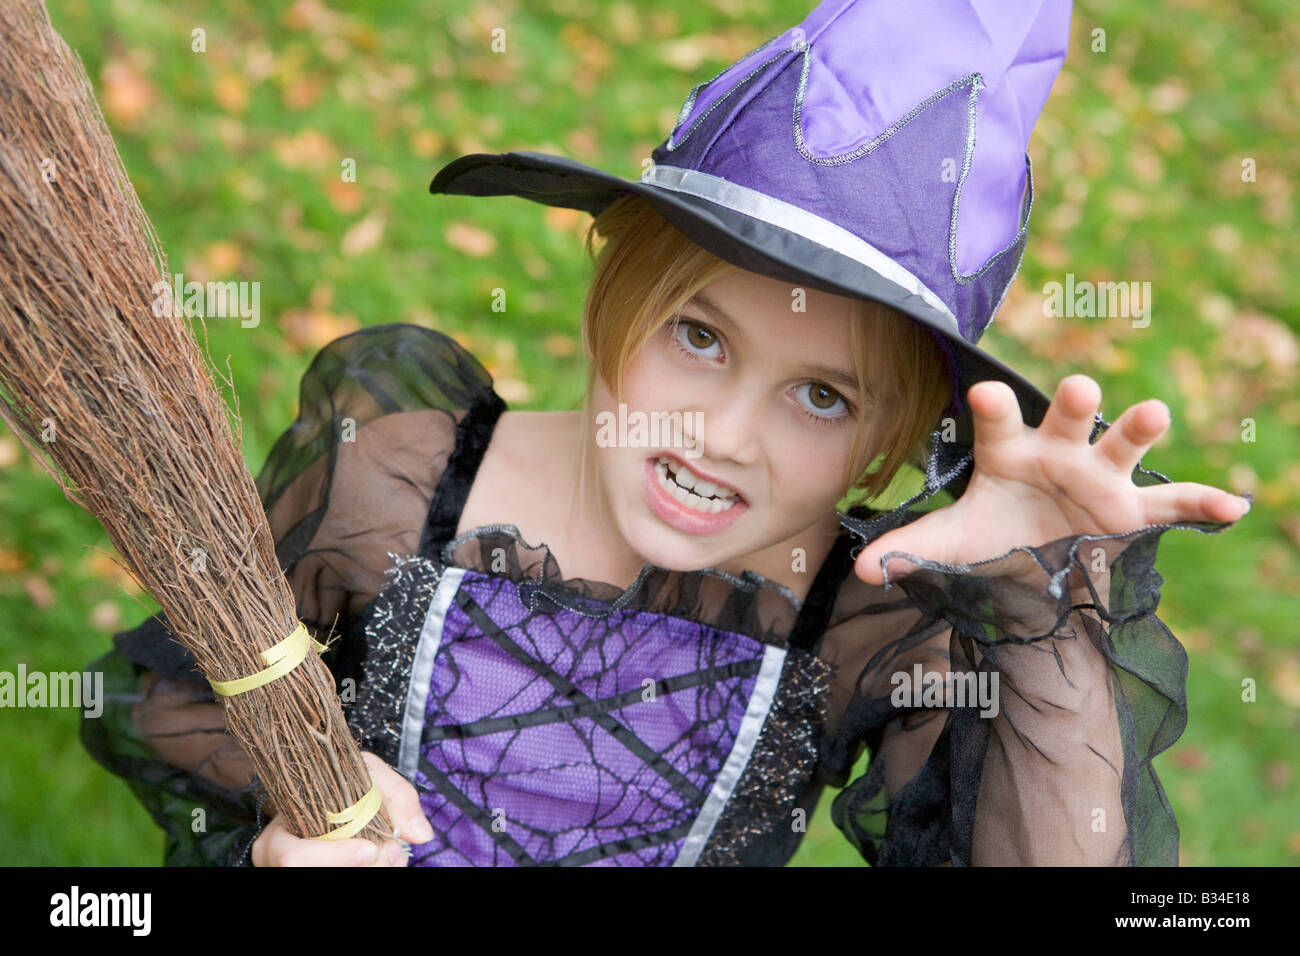 Young girl outdoors in witch costume on Halloween Stock Photo